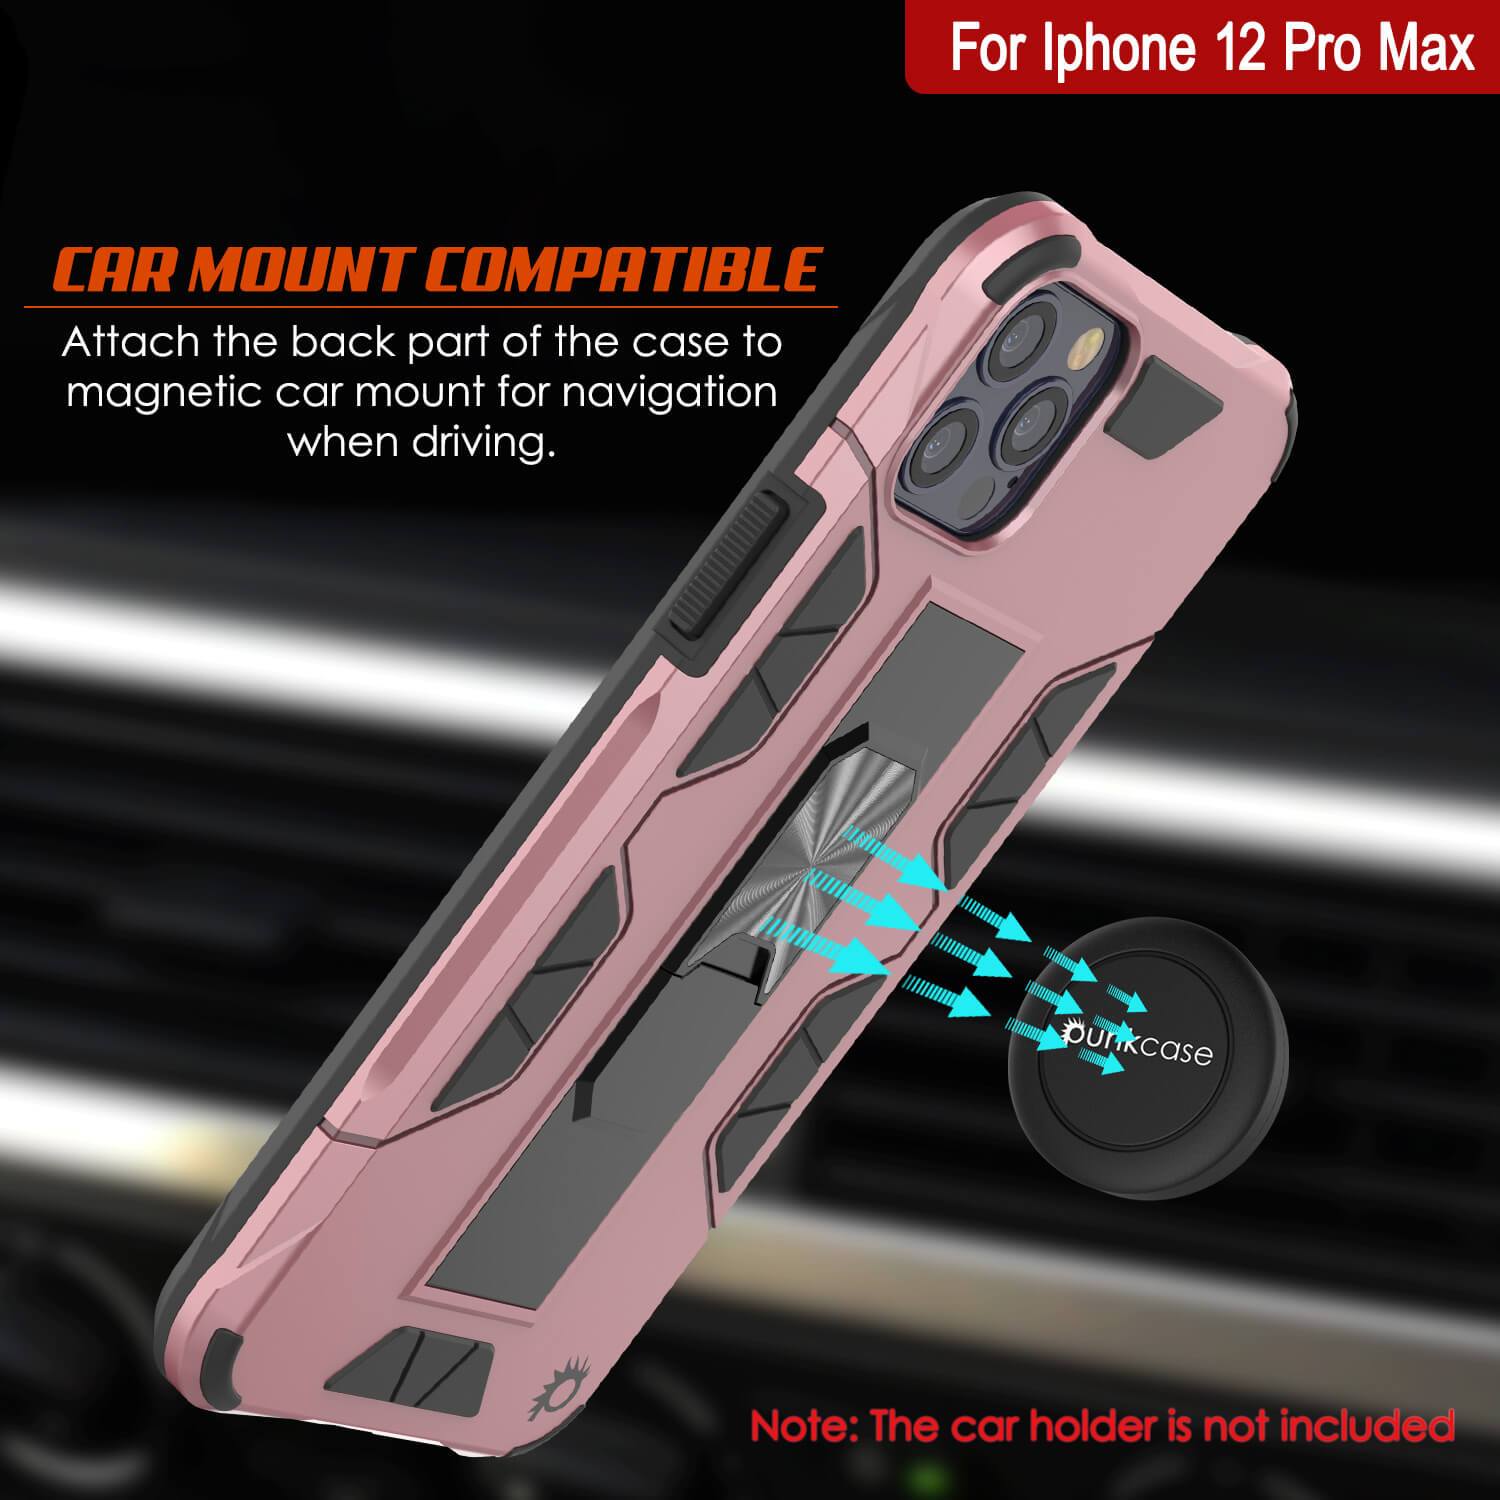 Punkcase iPhone 12 Pro Max Case [ArmorShield Series] Military Style Protective Dual Layer Case Rose-Gold